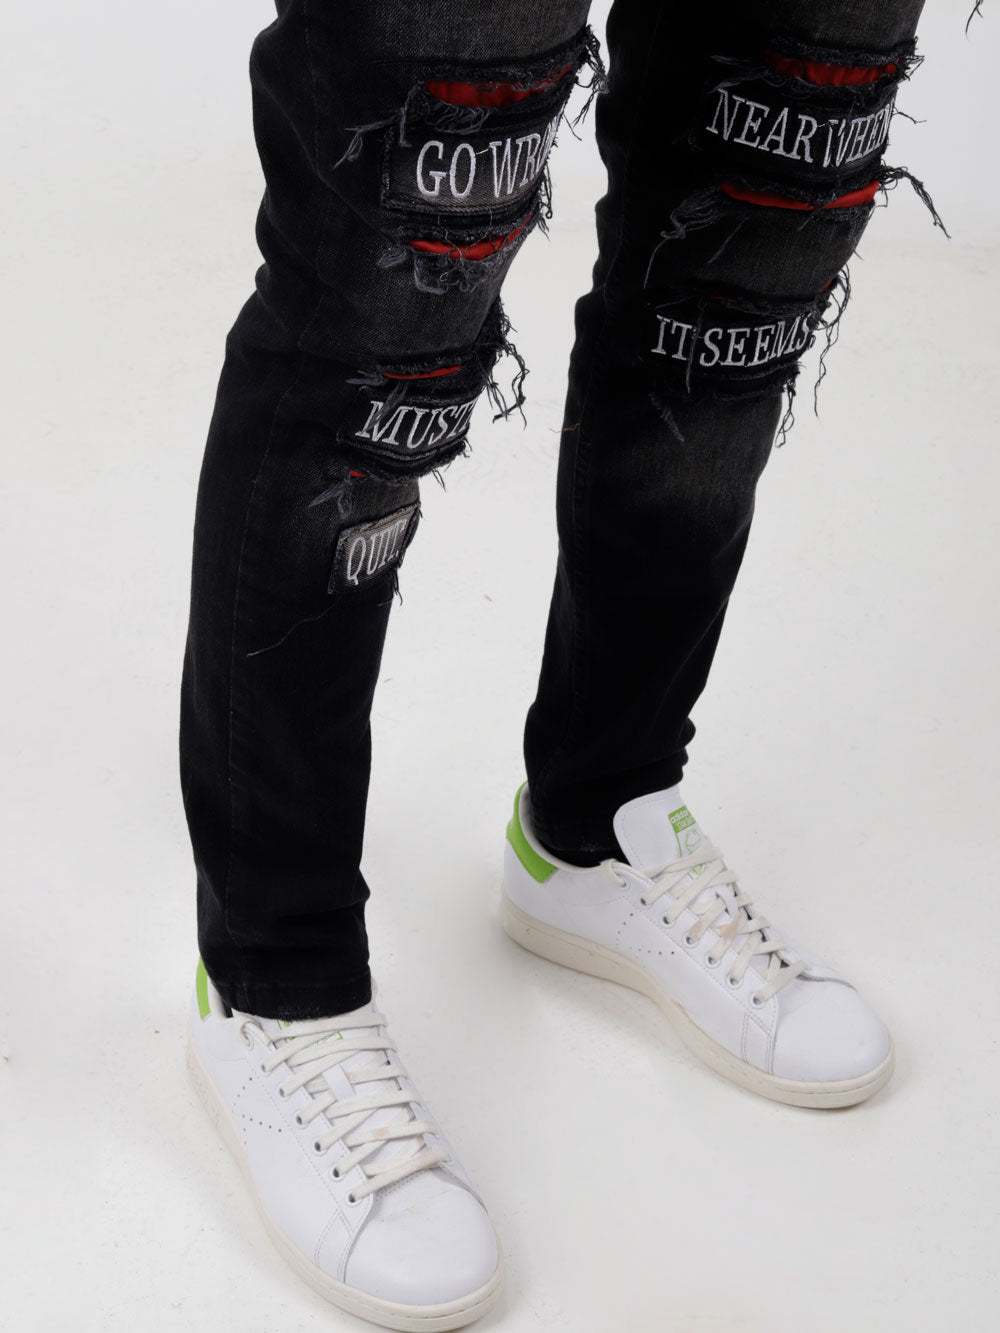 A man wearing PAW TRAIL ripped jeans and sneakers.